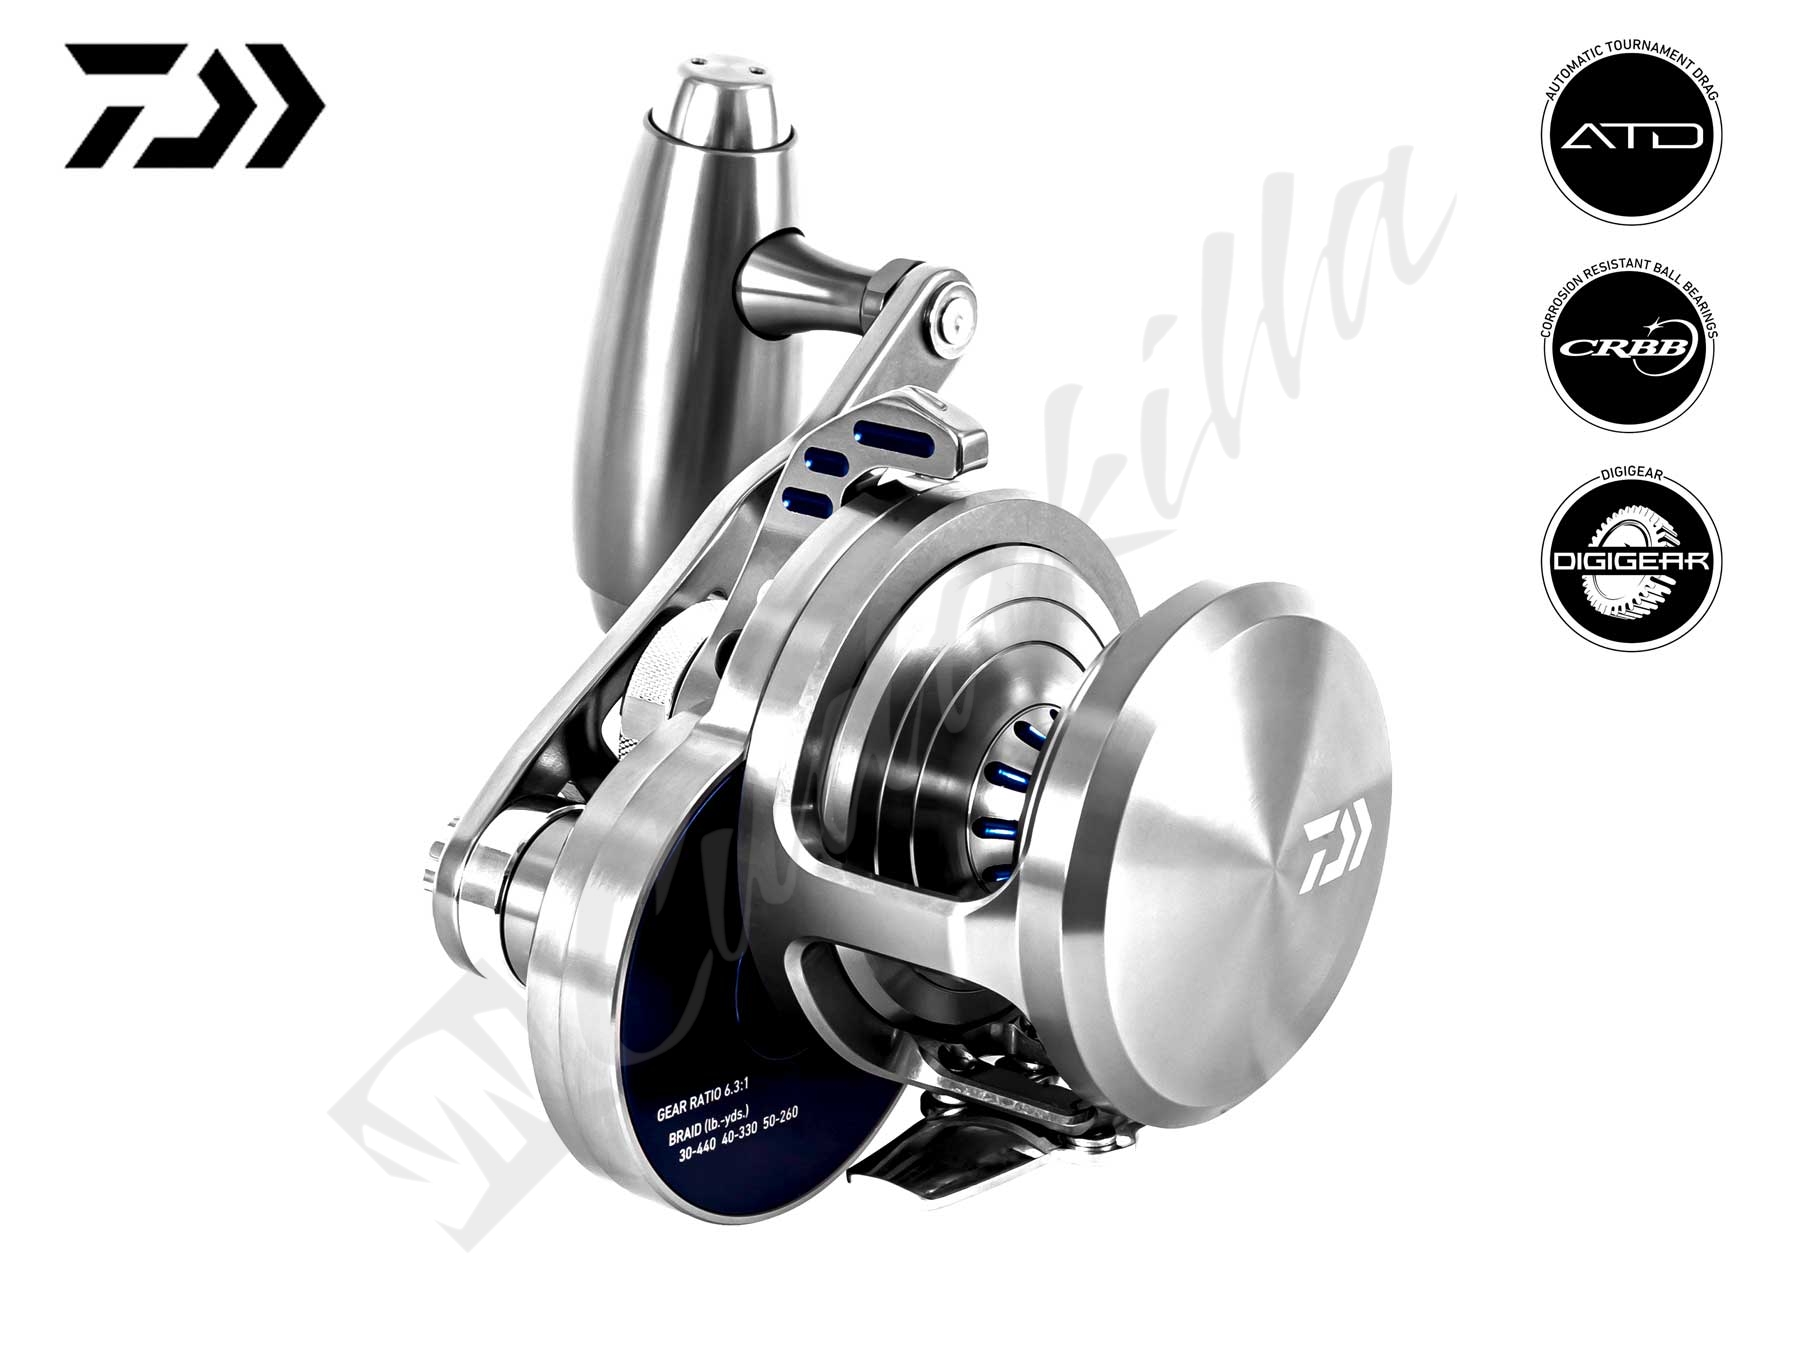 A close up on the Daiwa Saltiga Lever Drag Two Speed Reels 